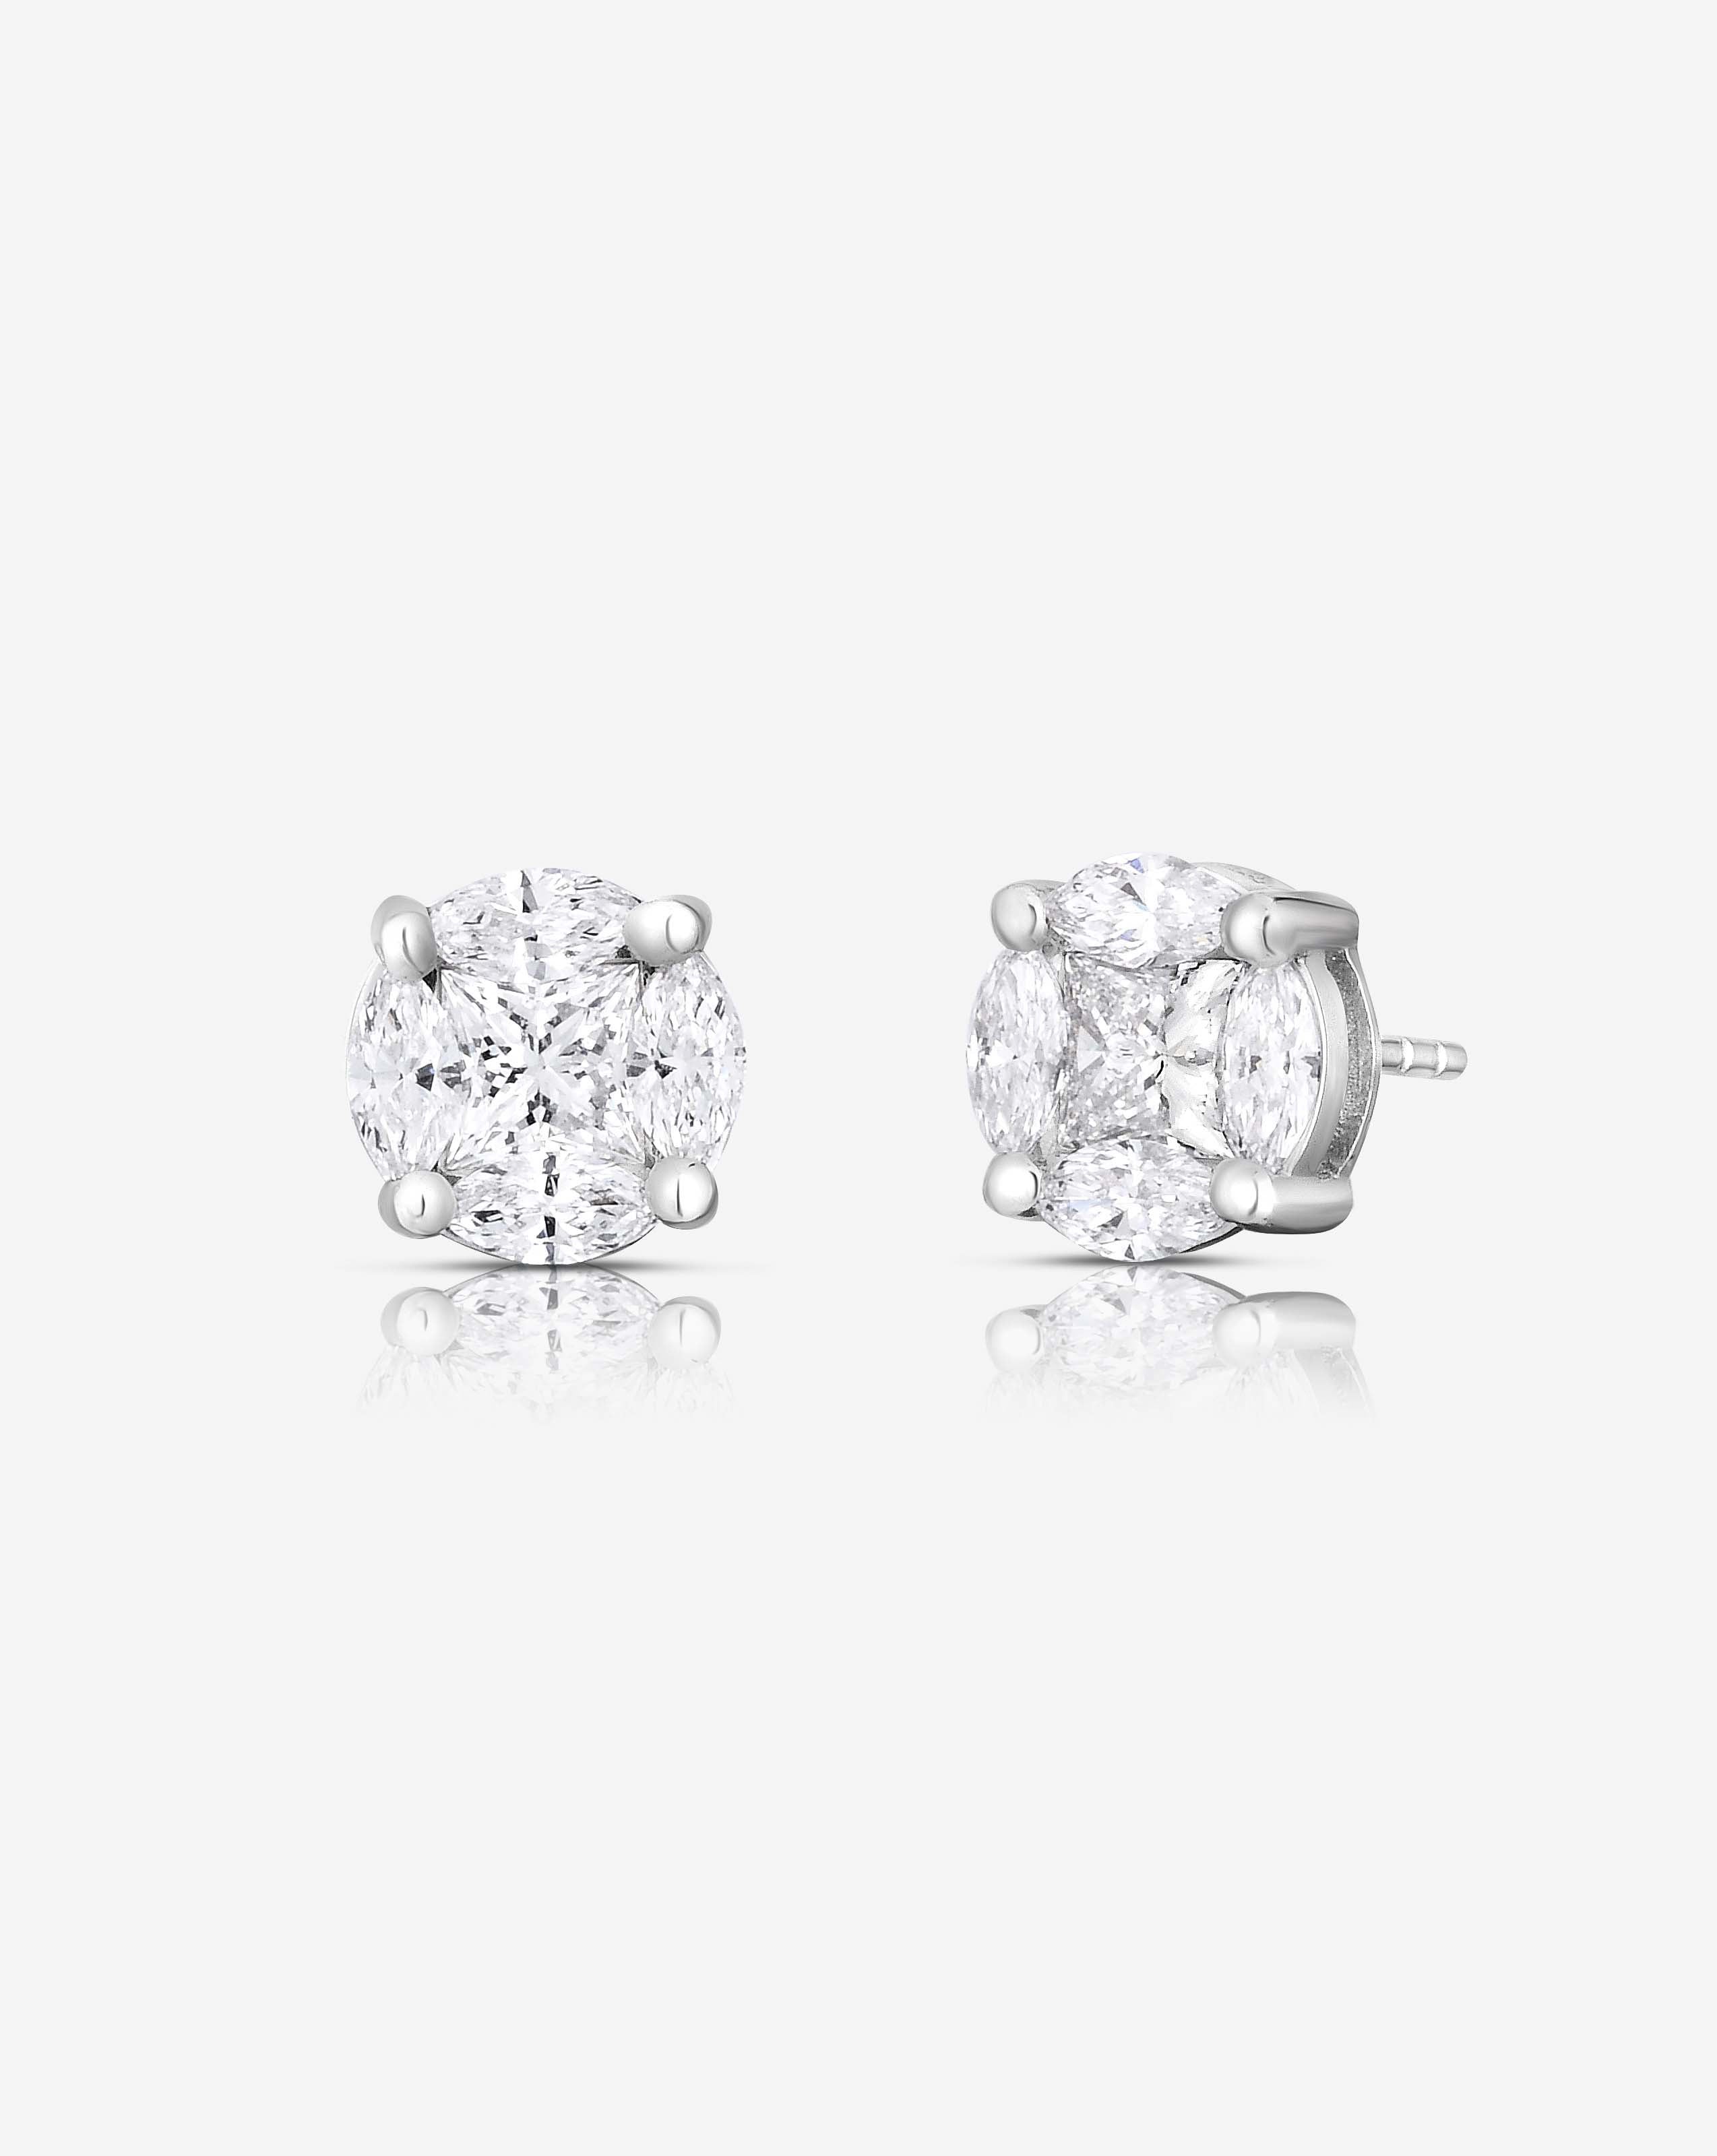 Amazon.com: Amanda Rose Collection AGS Certified 1ct TW Round REAL Diamond  Stud Earrings for Women in 14K White Gold with Screw Backs: Clothing, Shoes  & Jewelry